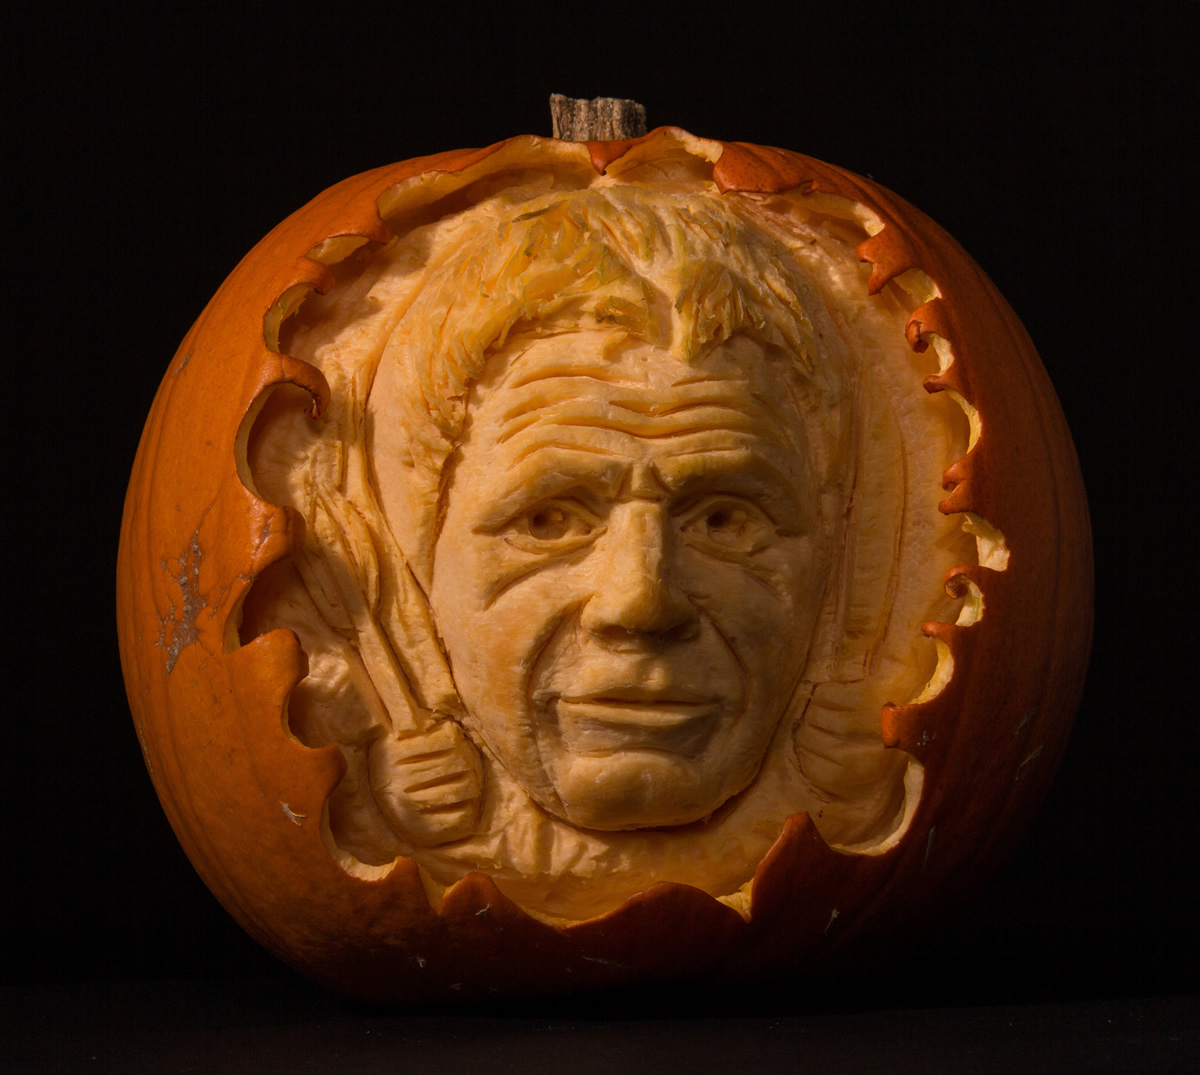 Celebrity Gordon Ramsey carved in to a pumpkin